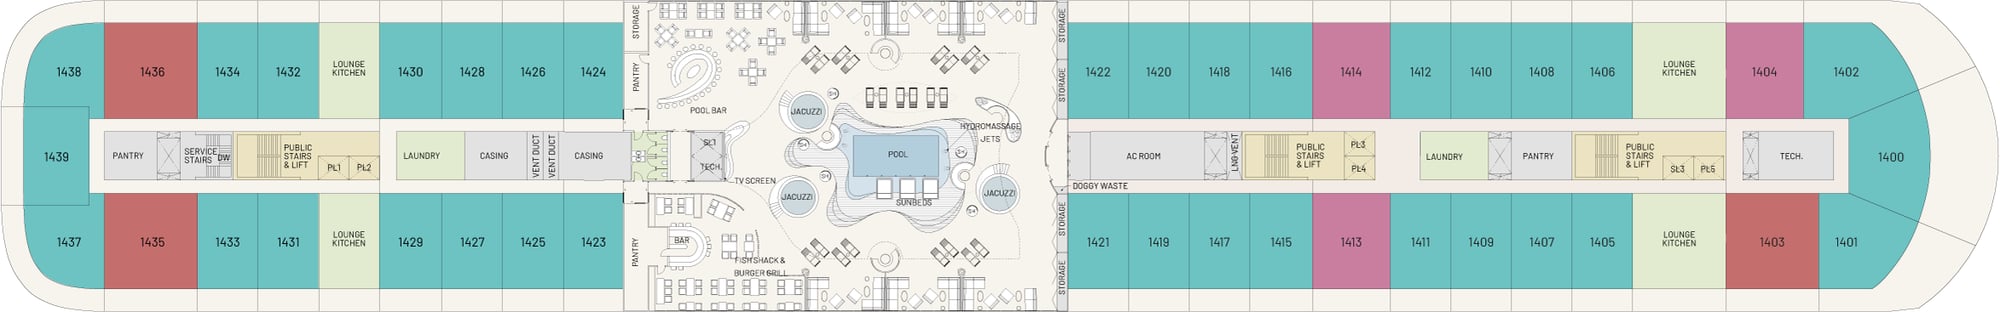 Floorplan of Deck 14 showing the location of the condo's on the cruise ship